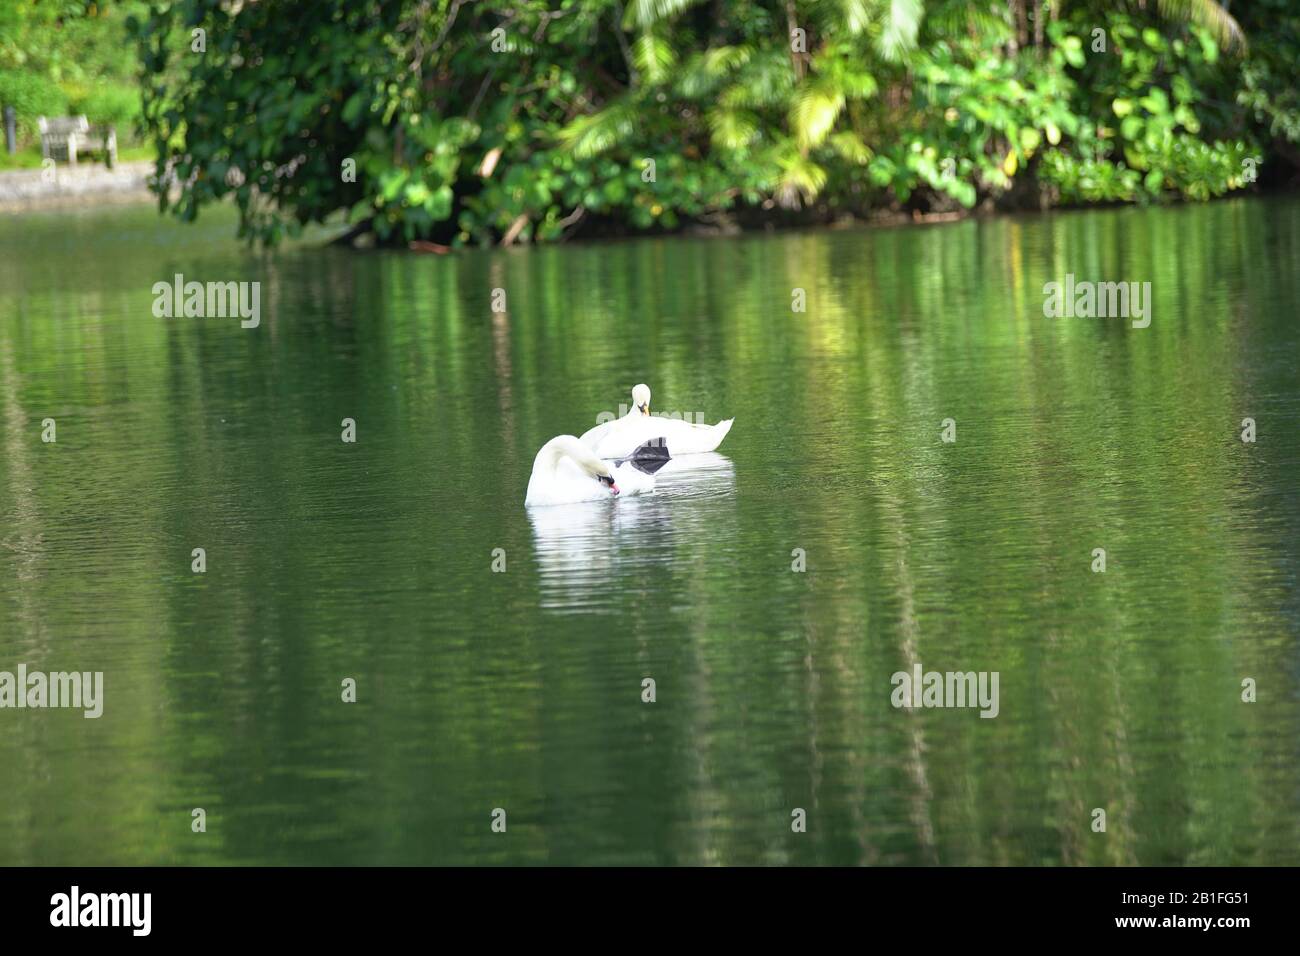 The White swan in the lake Stock Photo